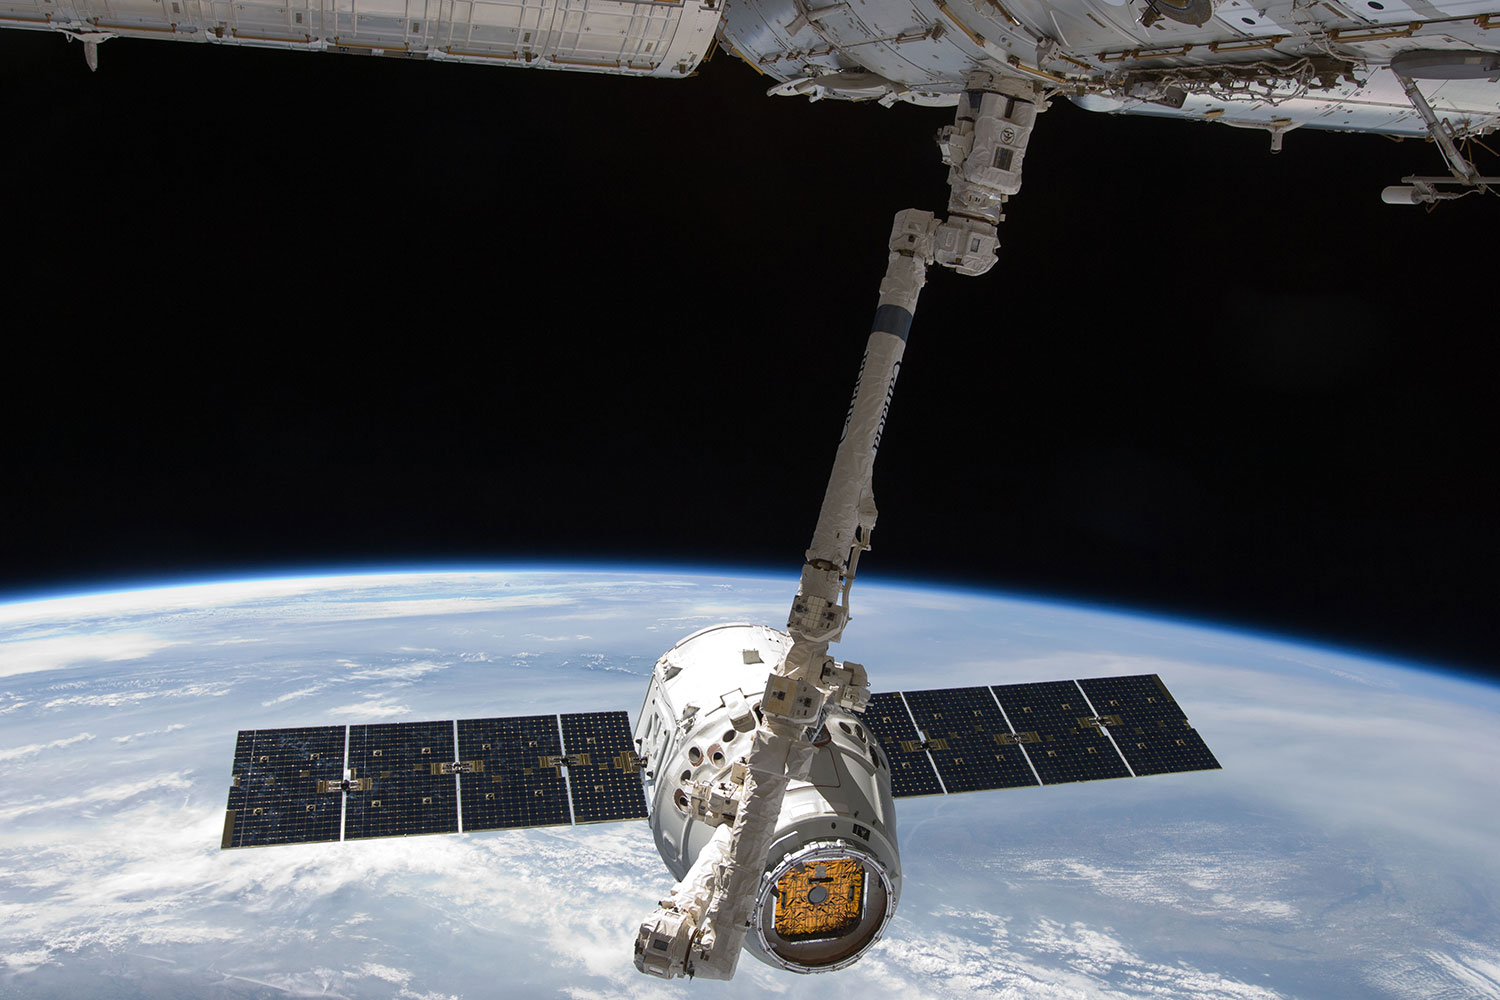 Dragon capsule delivers a floating robot and 'Mighty Mice' to ISS